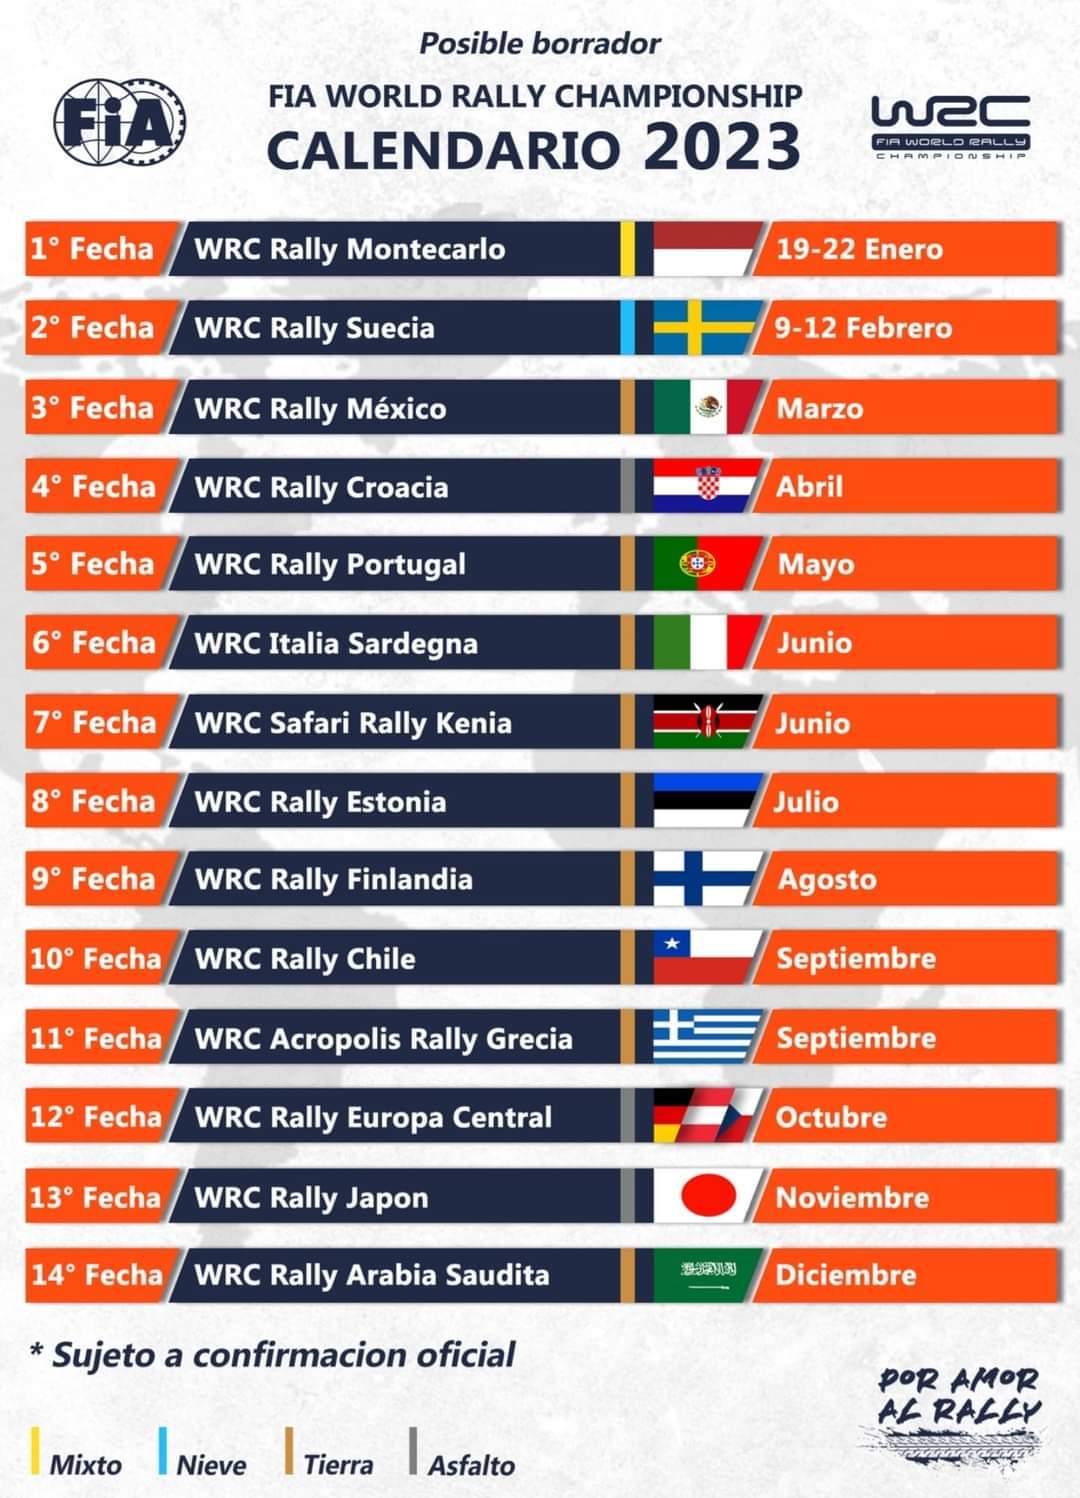 Rumors about 2023 World Rally Championship calendar are online — Hive